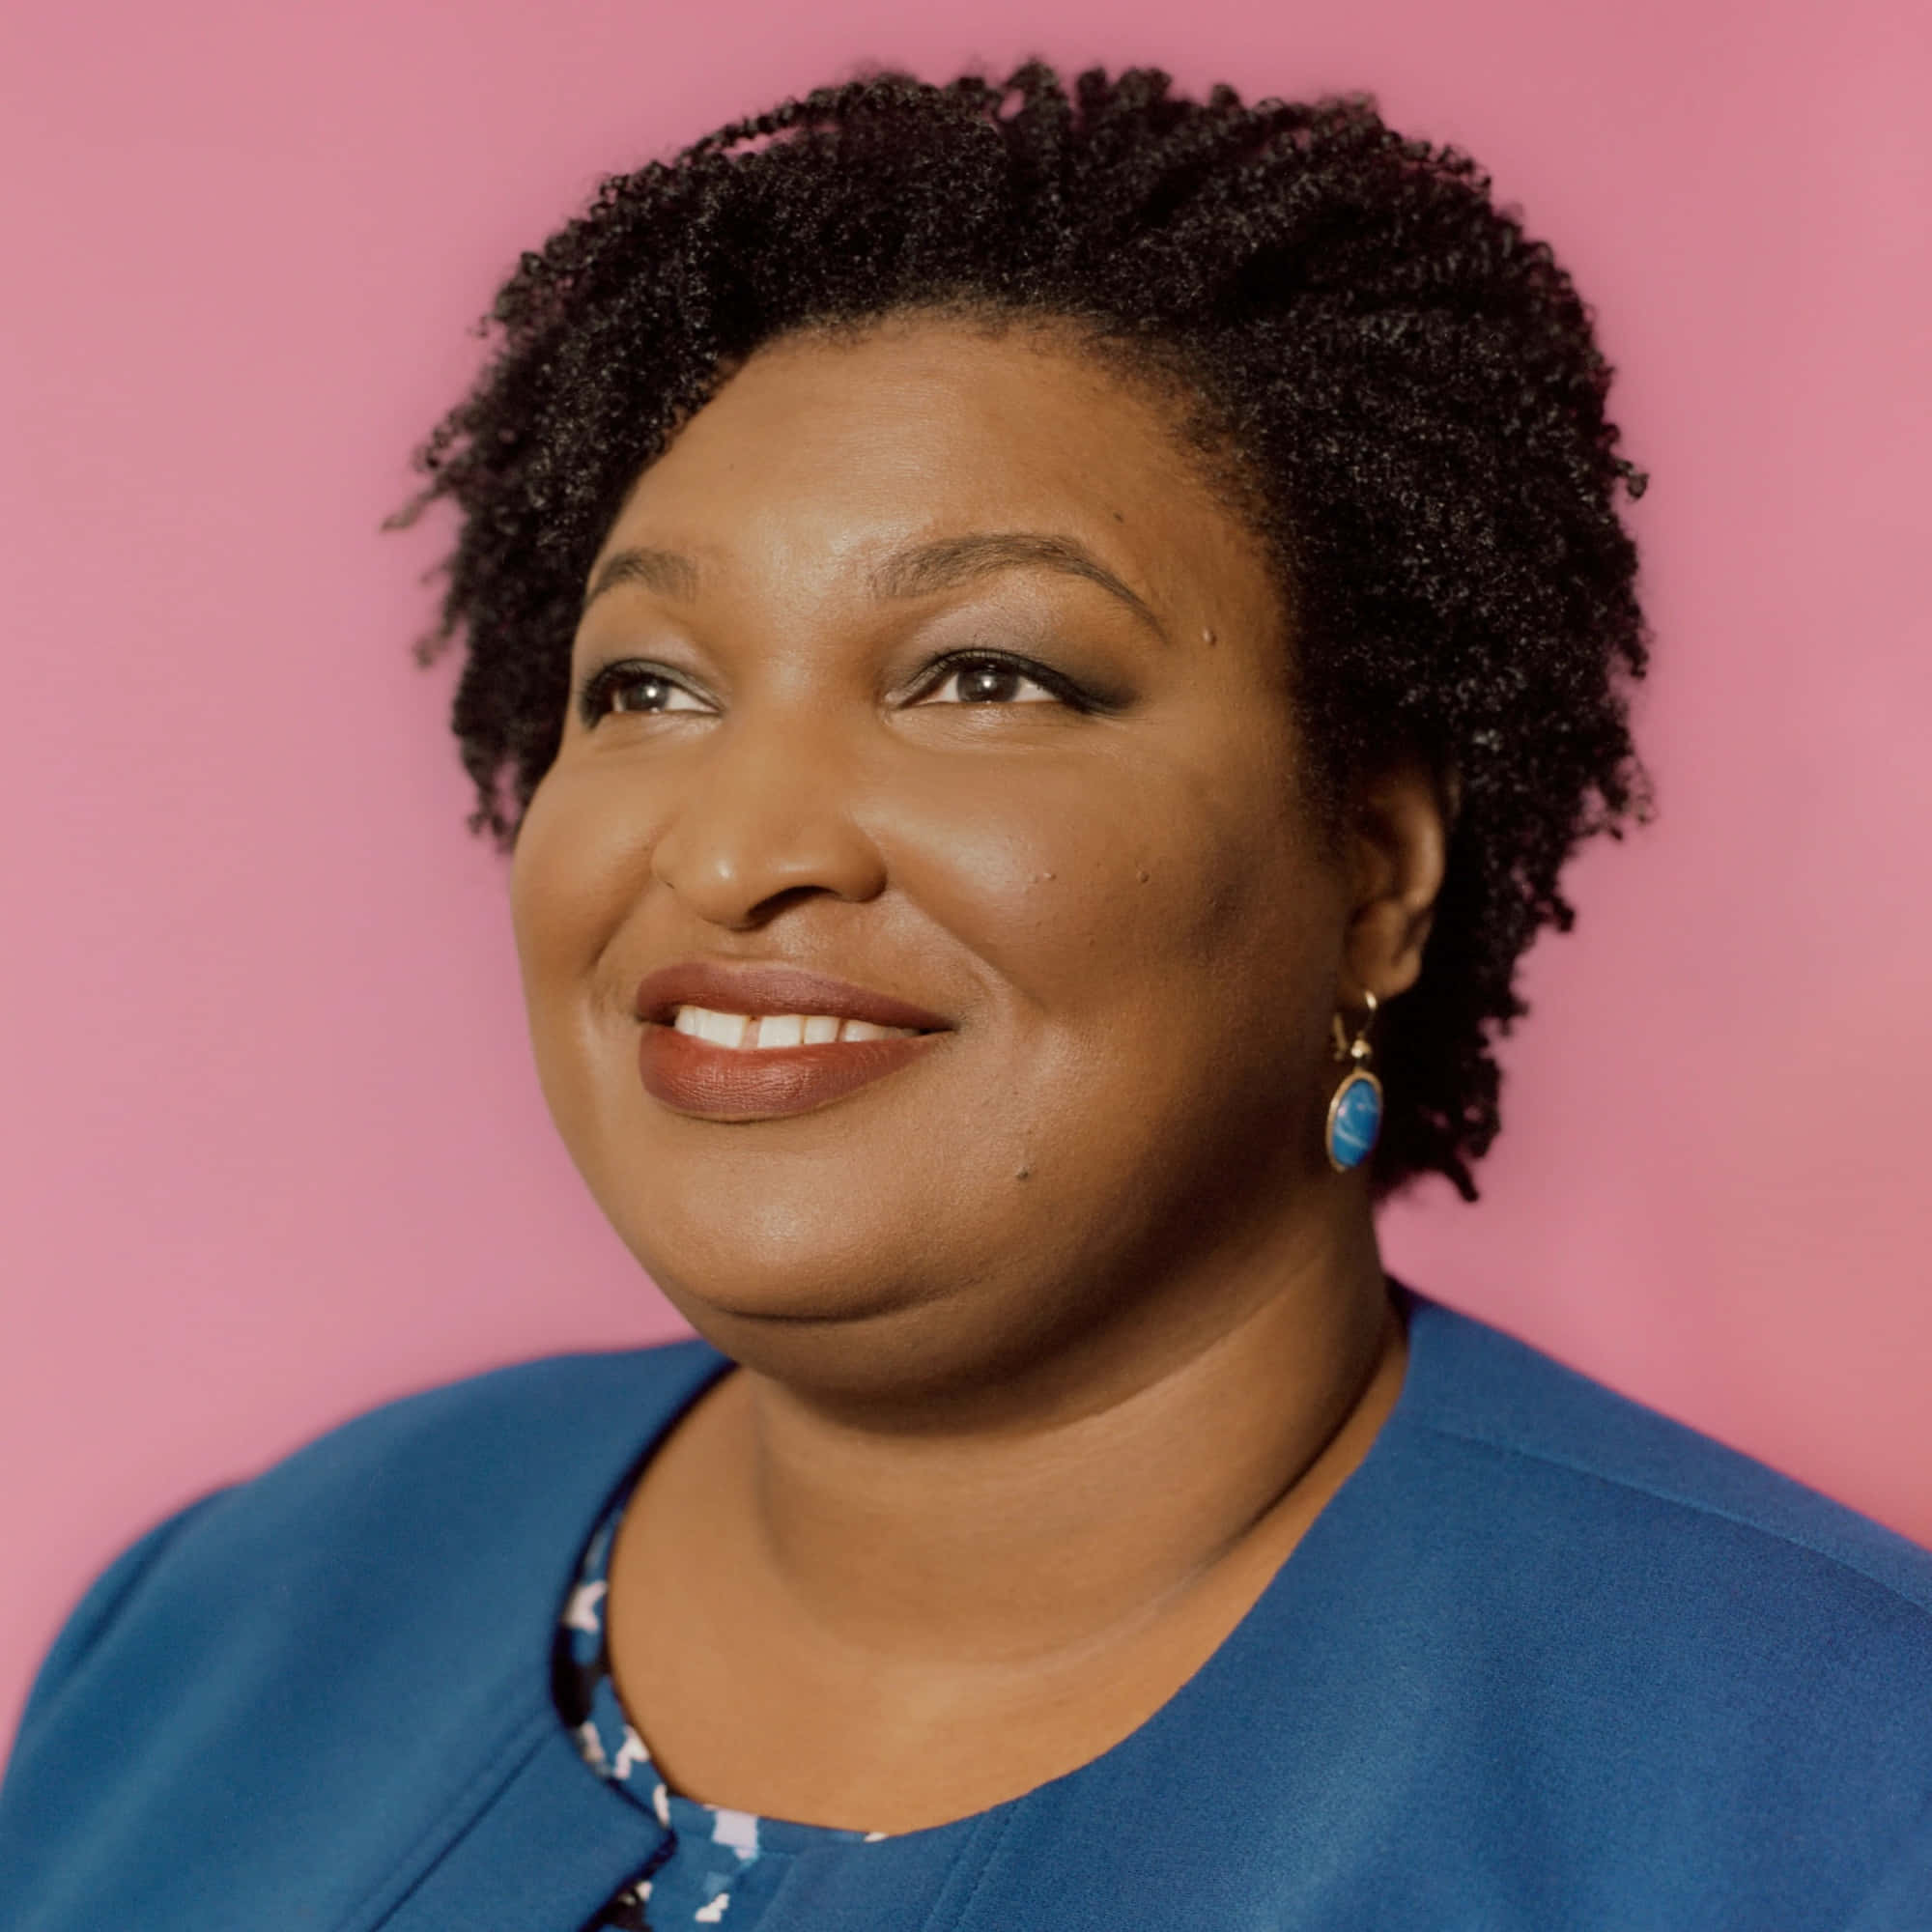 Stacey Abrams, An Influential American Politician, Delivering A Speech. Wallpaper